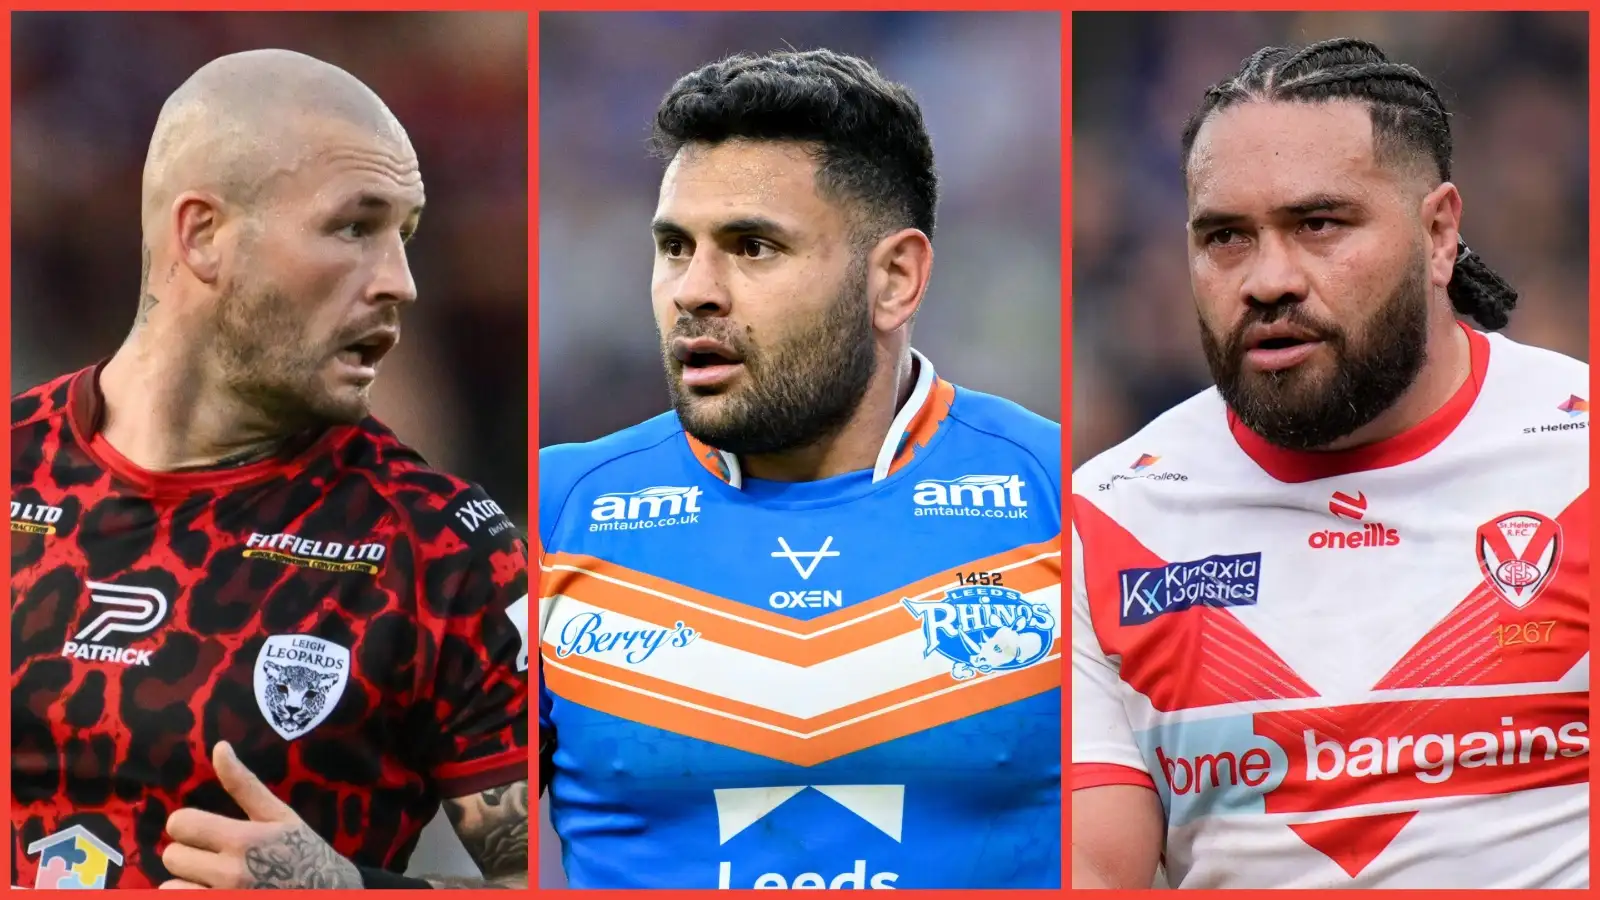 Leigh Leopards, Leeds Rhinos stars among 7 biggest Super League names whose futures remain undecided